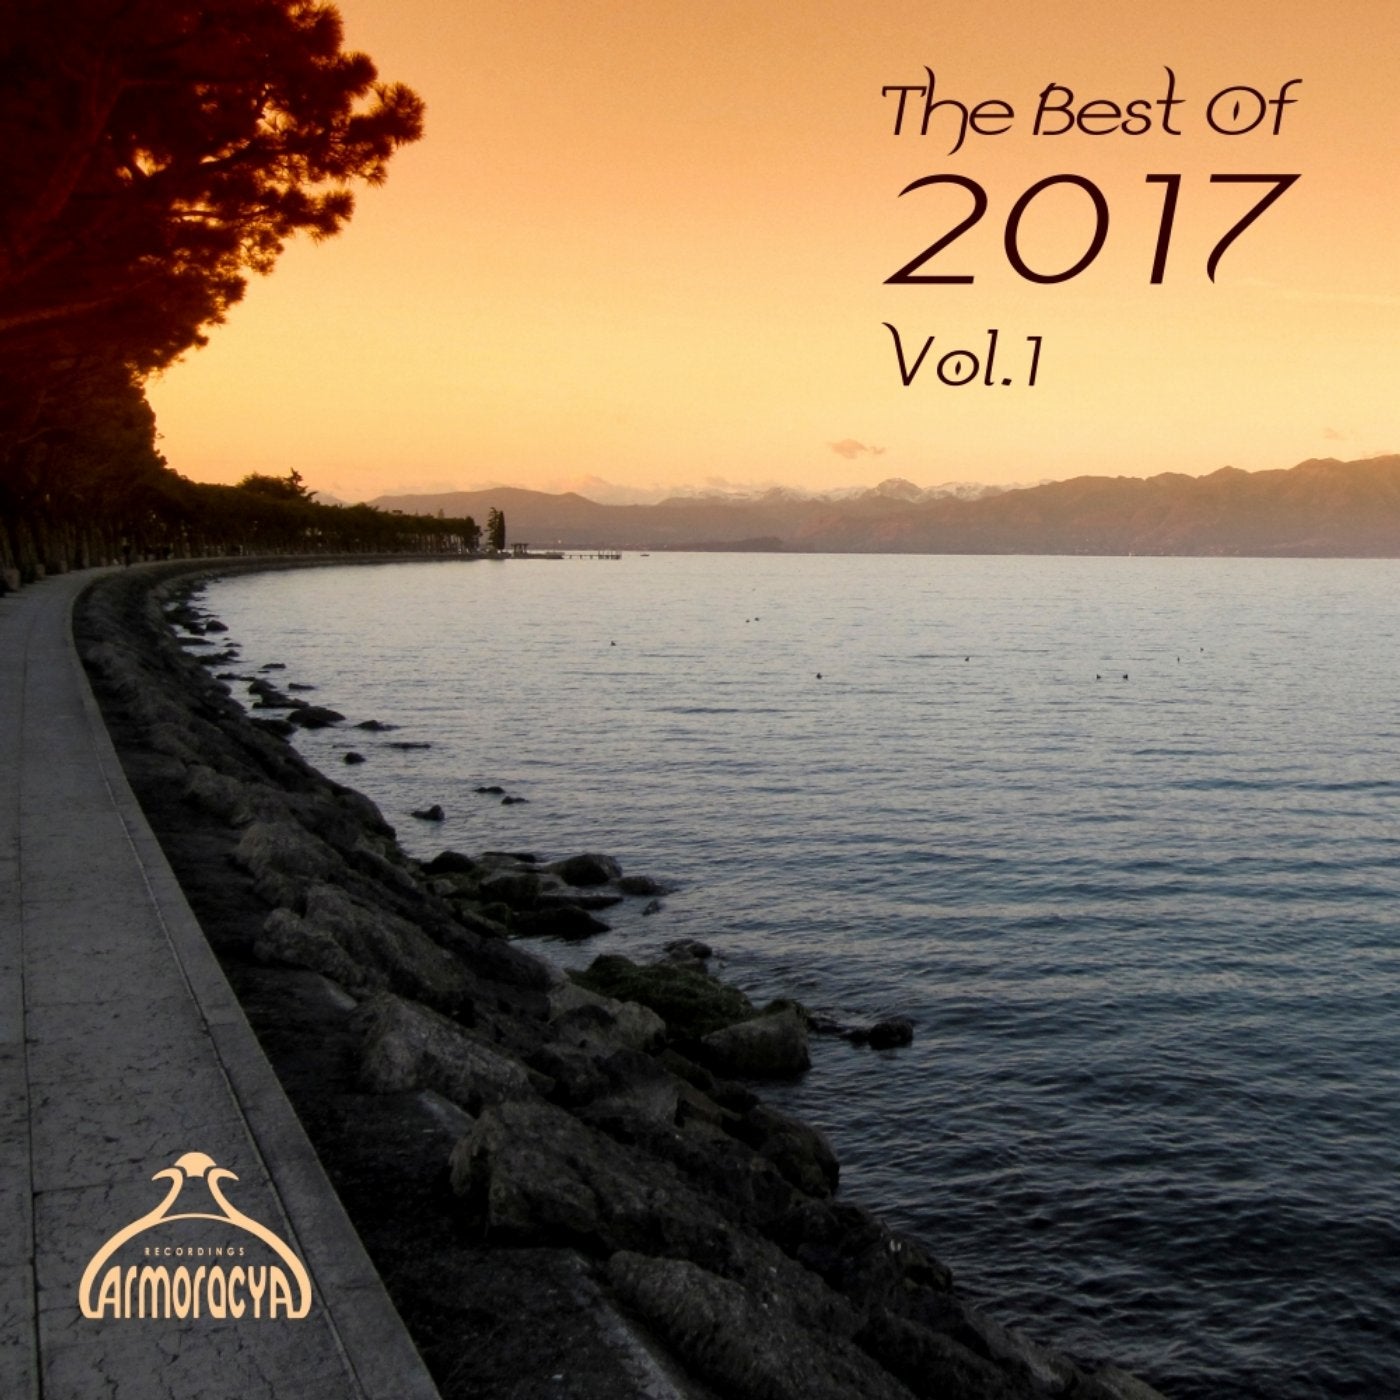 The Best Of 2017, Vol.1